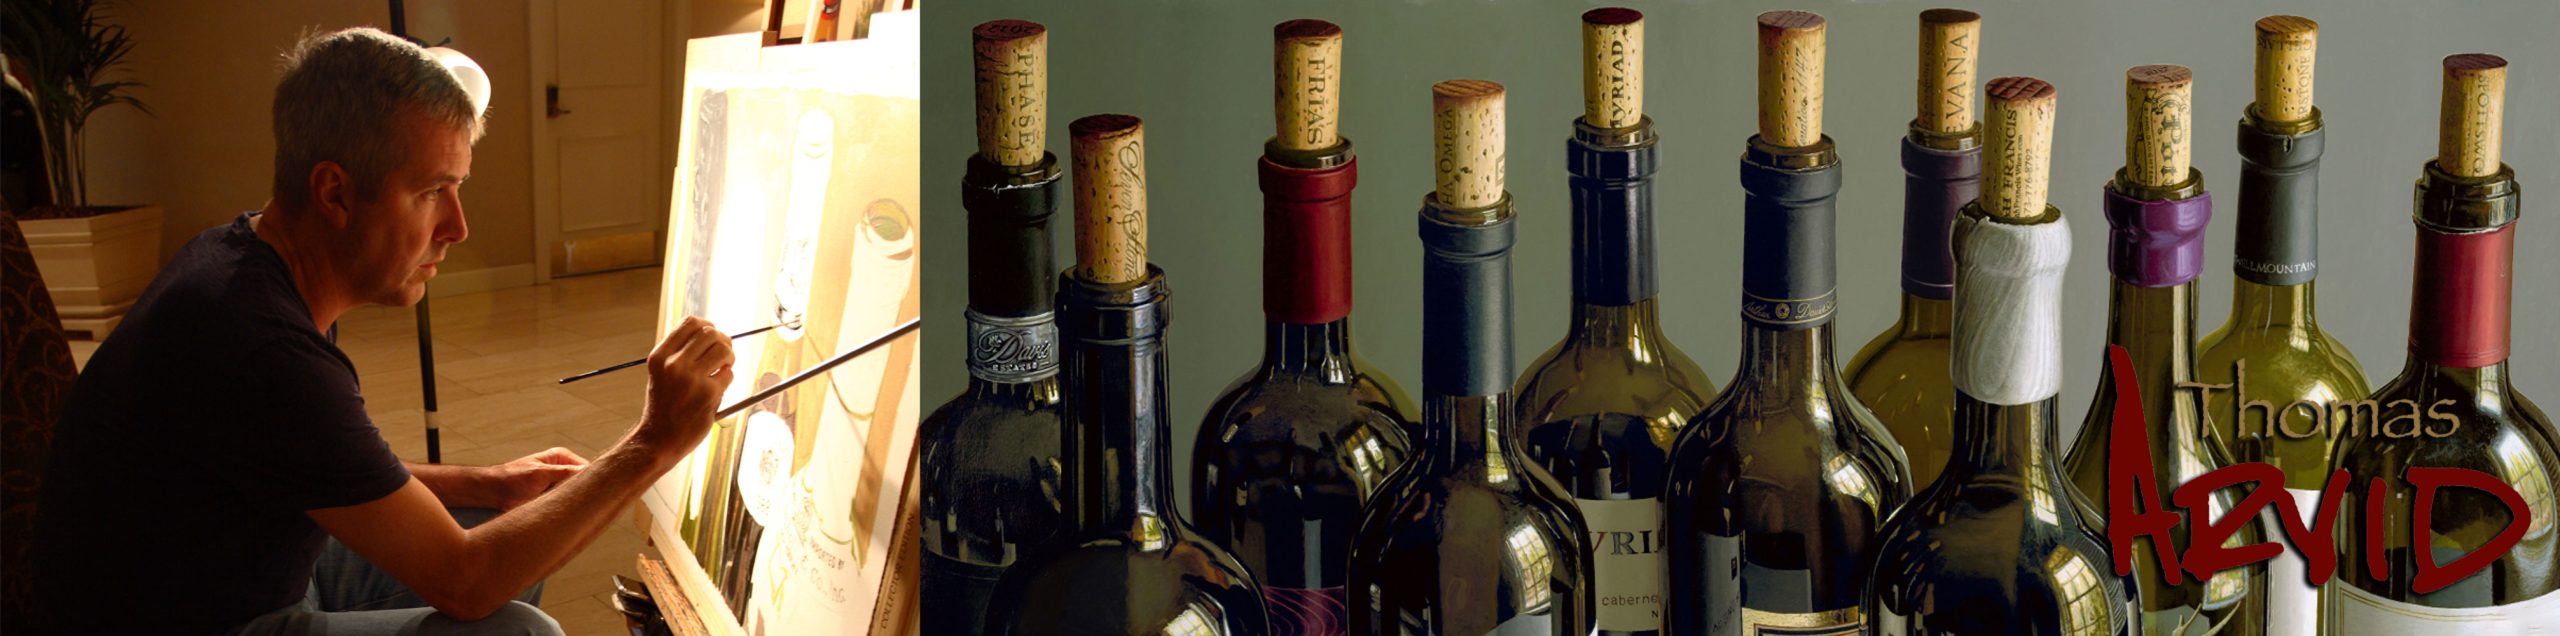 Thomas Arvid: The Contemporary Sill Life Artist. Photo-realist painter of fine wines.